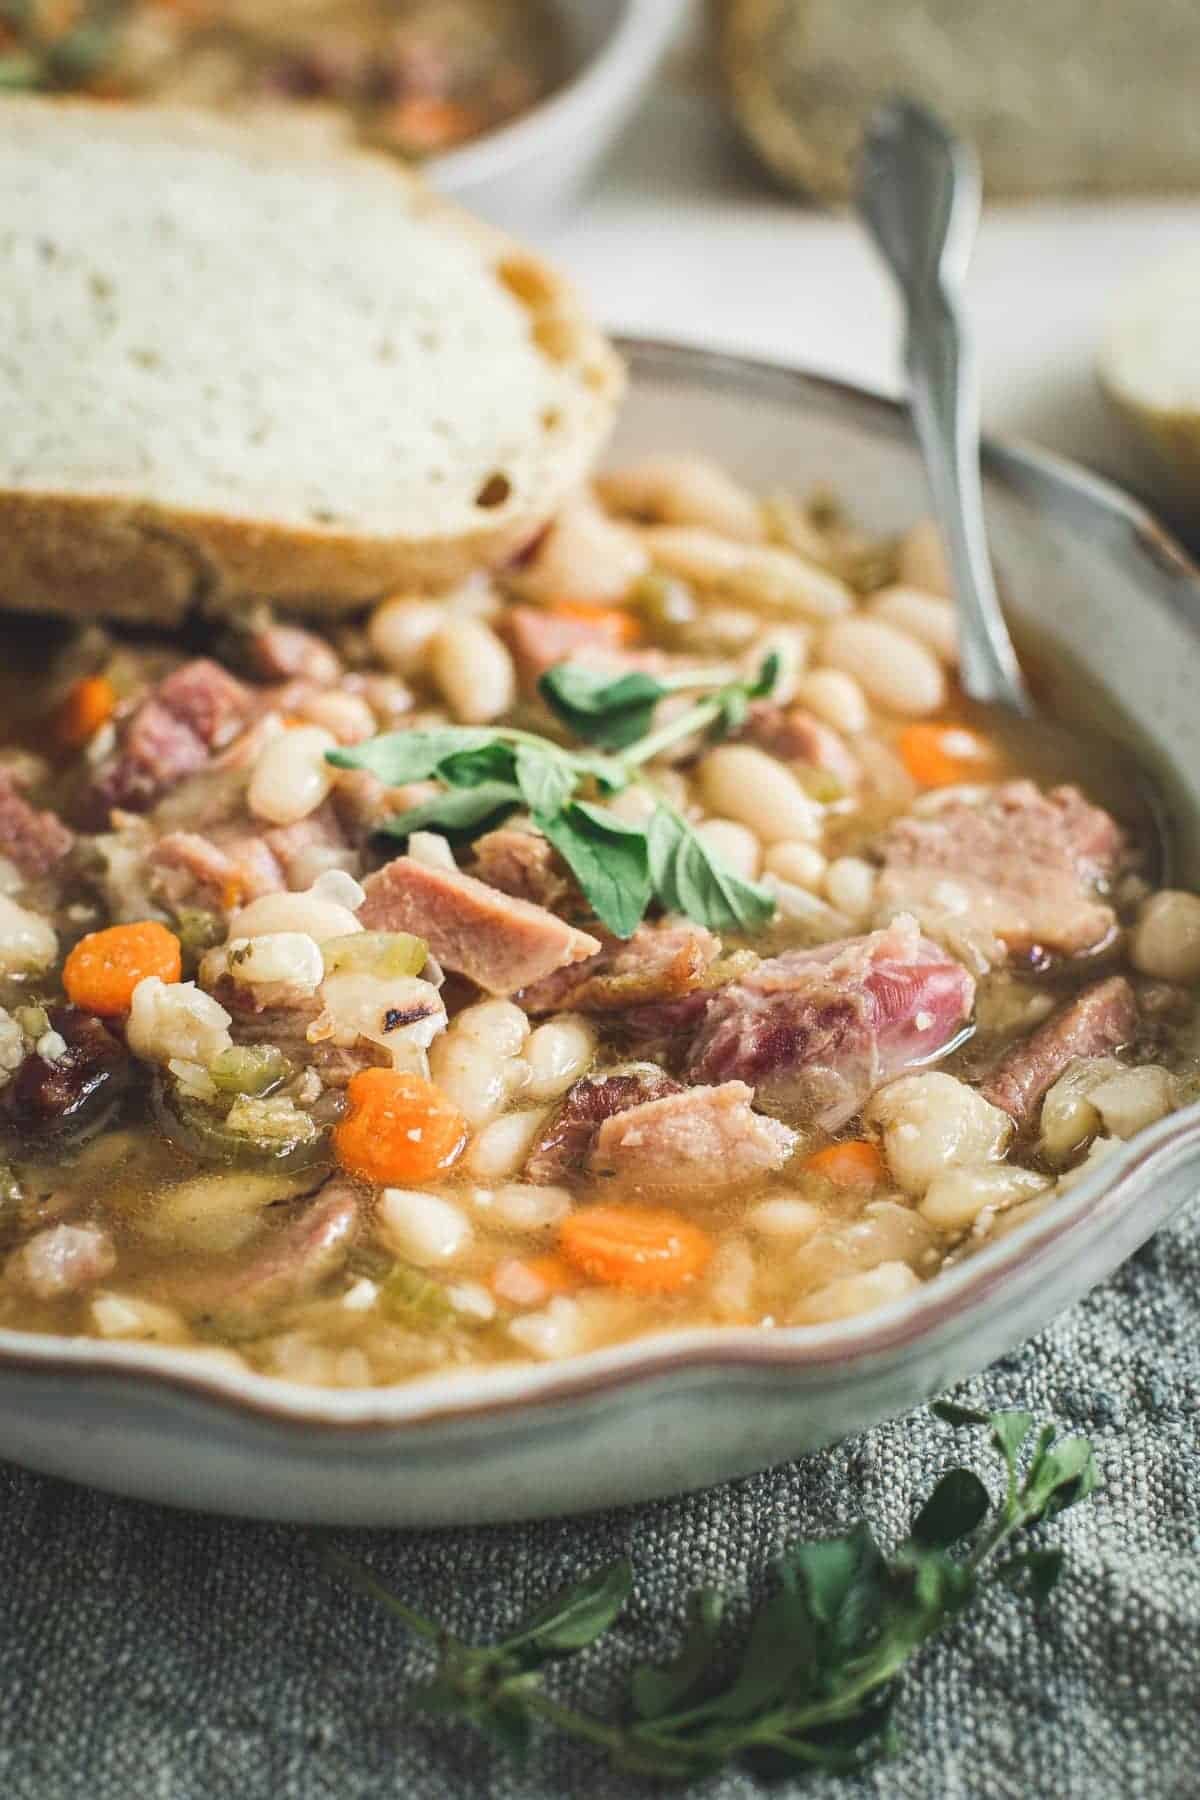 Northern beans and ham soup with crusty bread on the side.